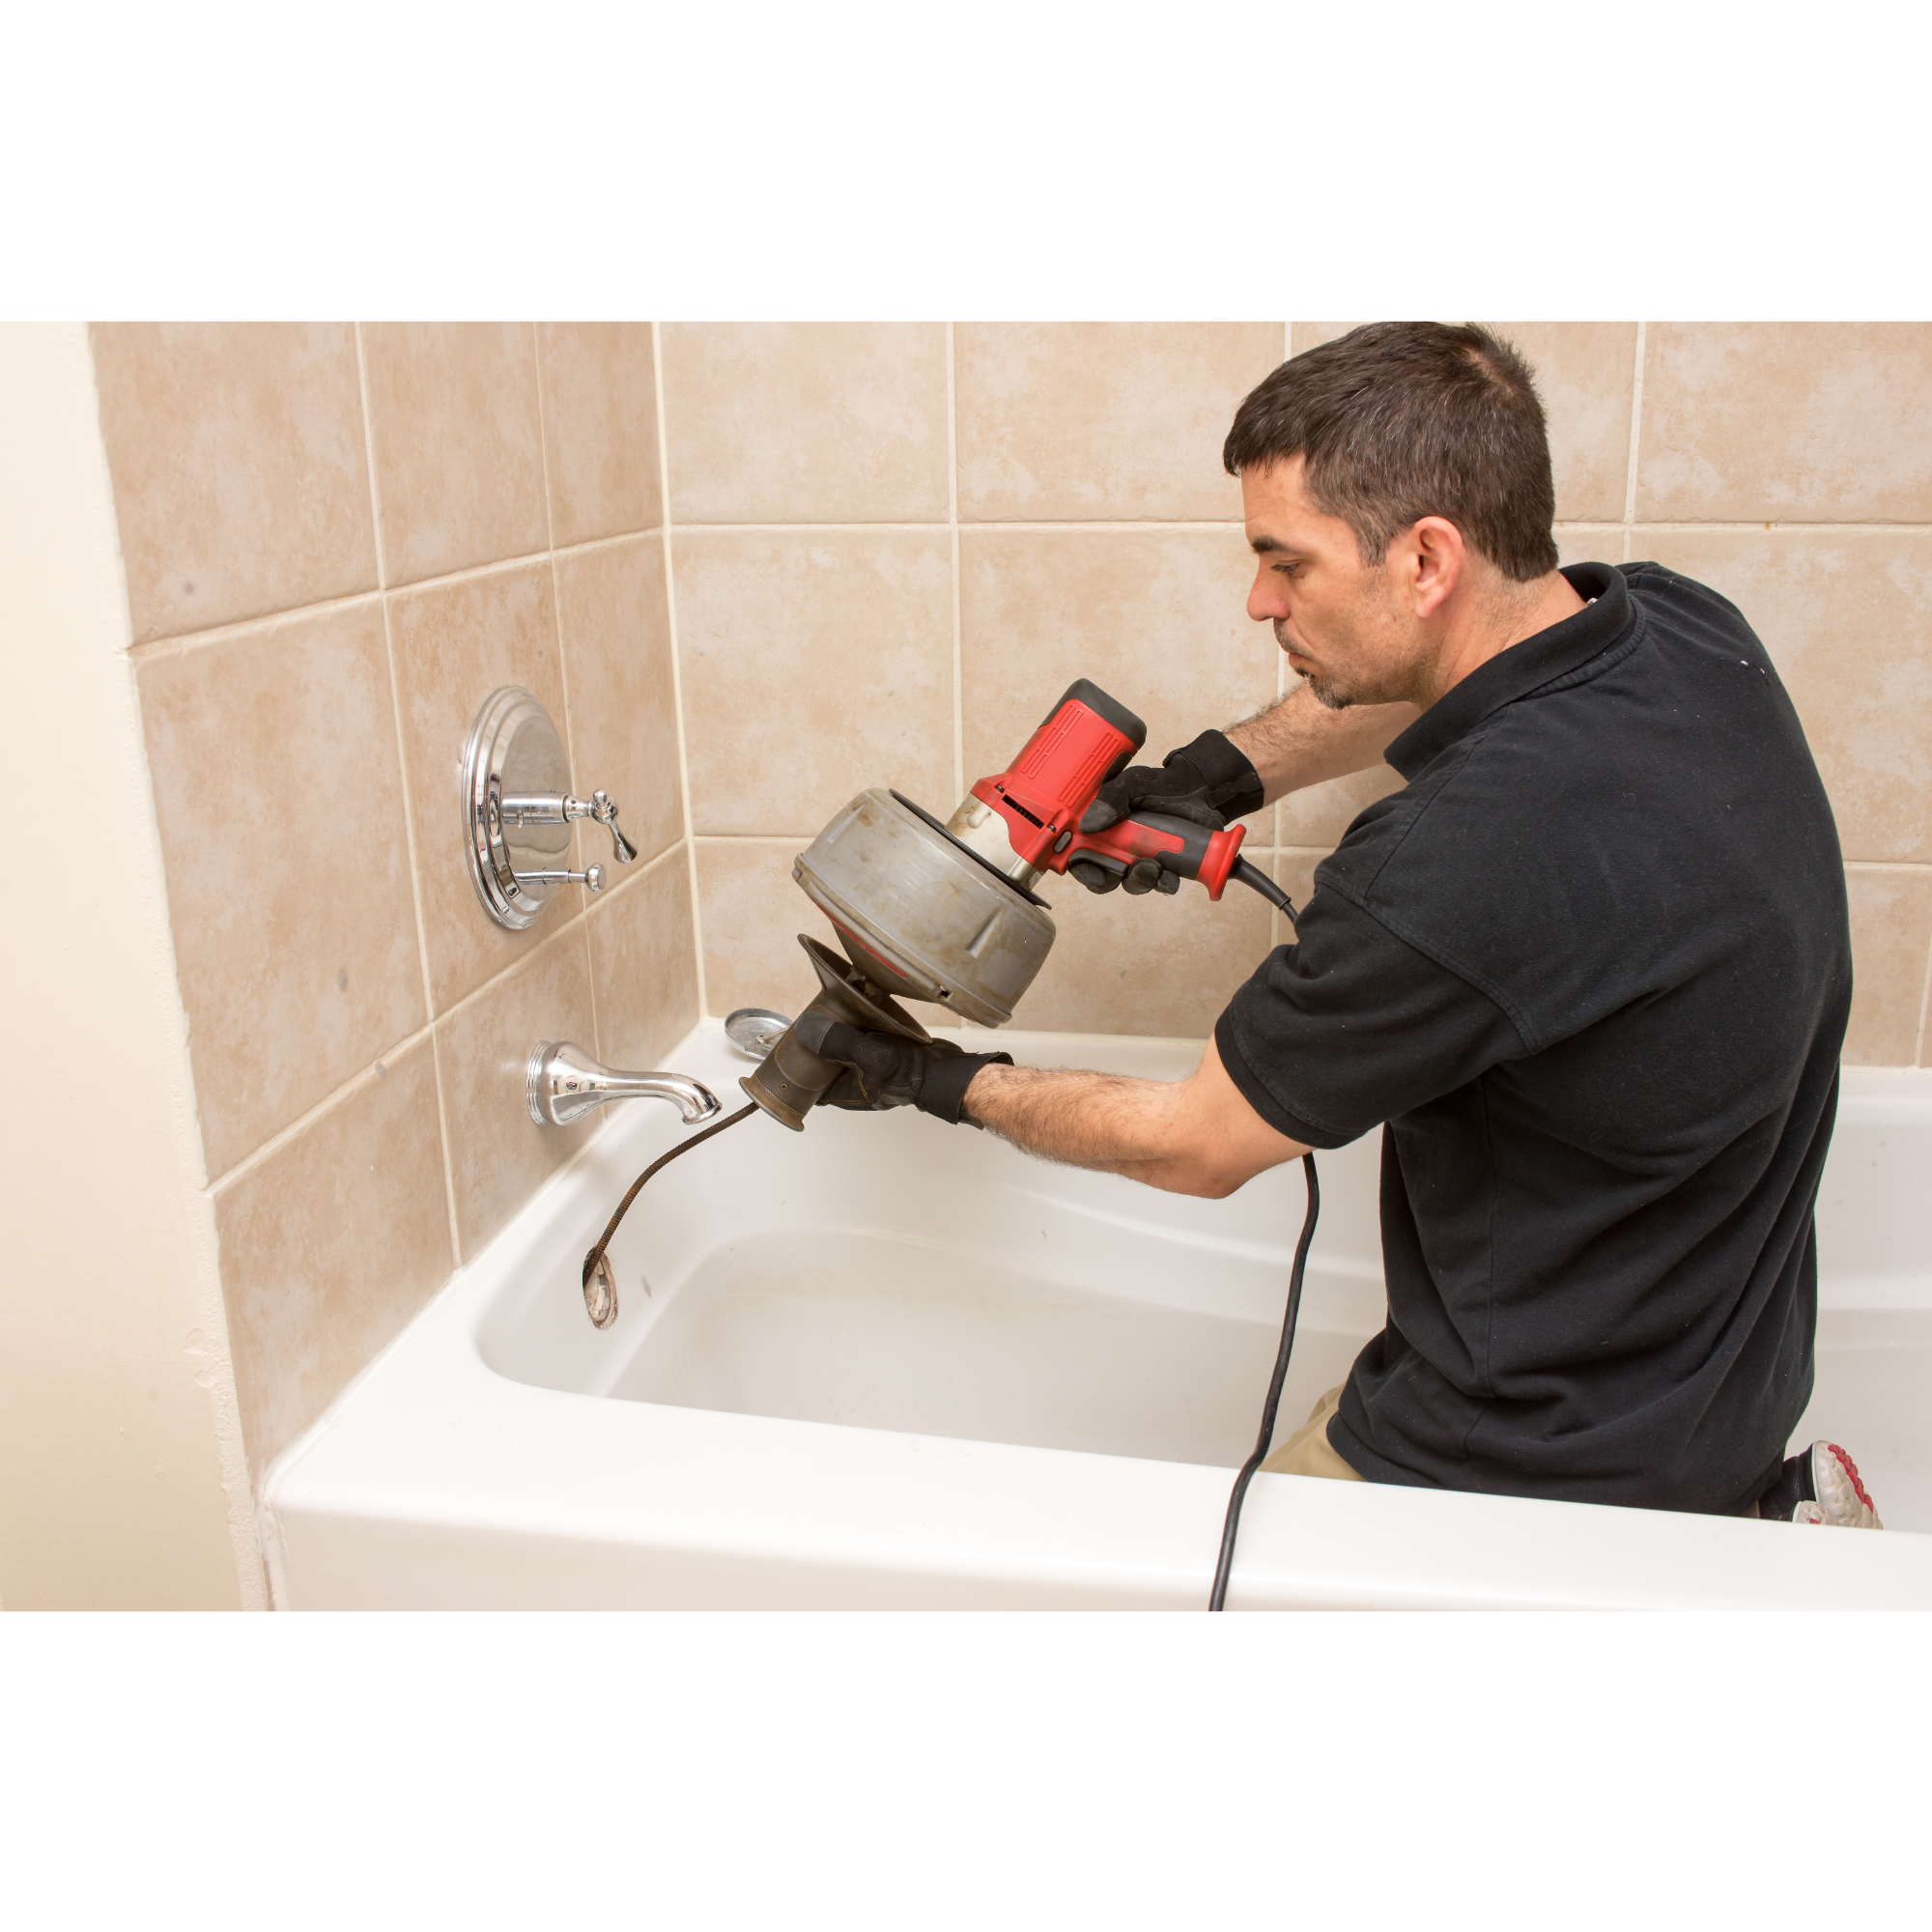 "Clearing the way: Expert technicians tackle drain cleaning with precision, ensuring smooth water flow and preventing clogs for a hassle-free plumbing system."